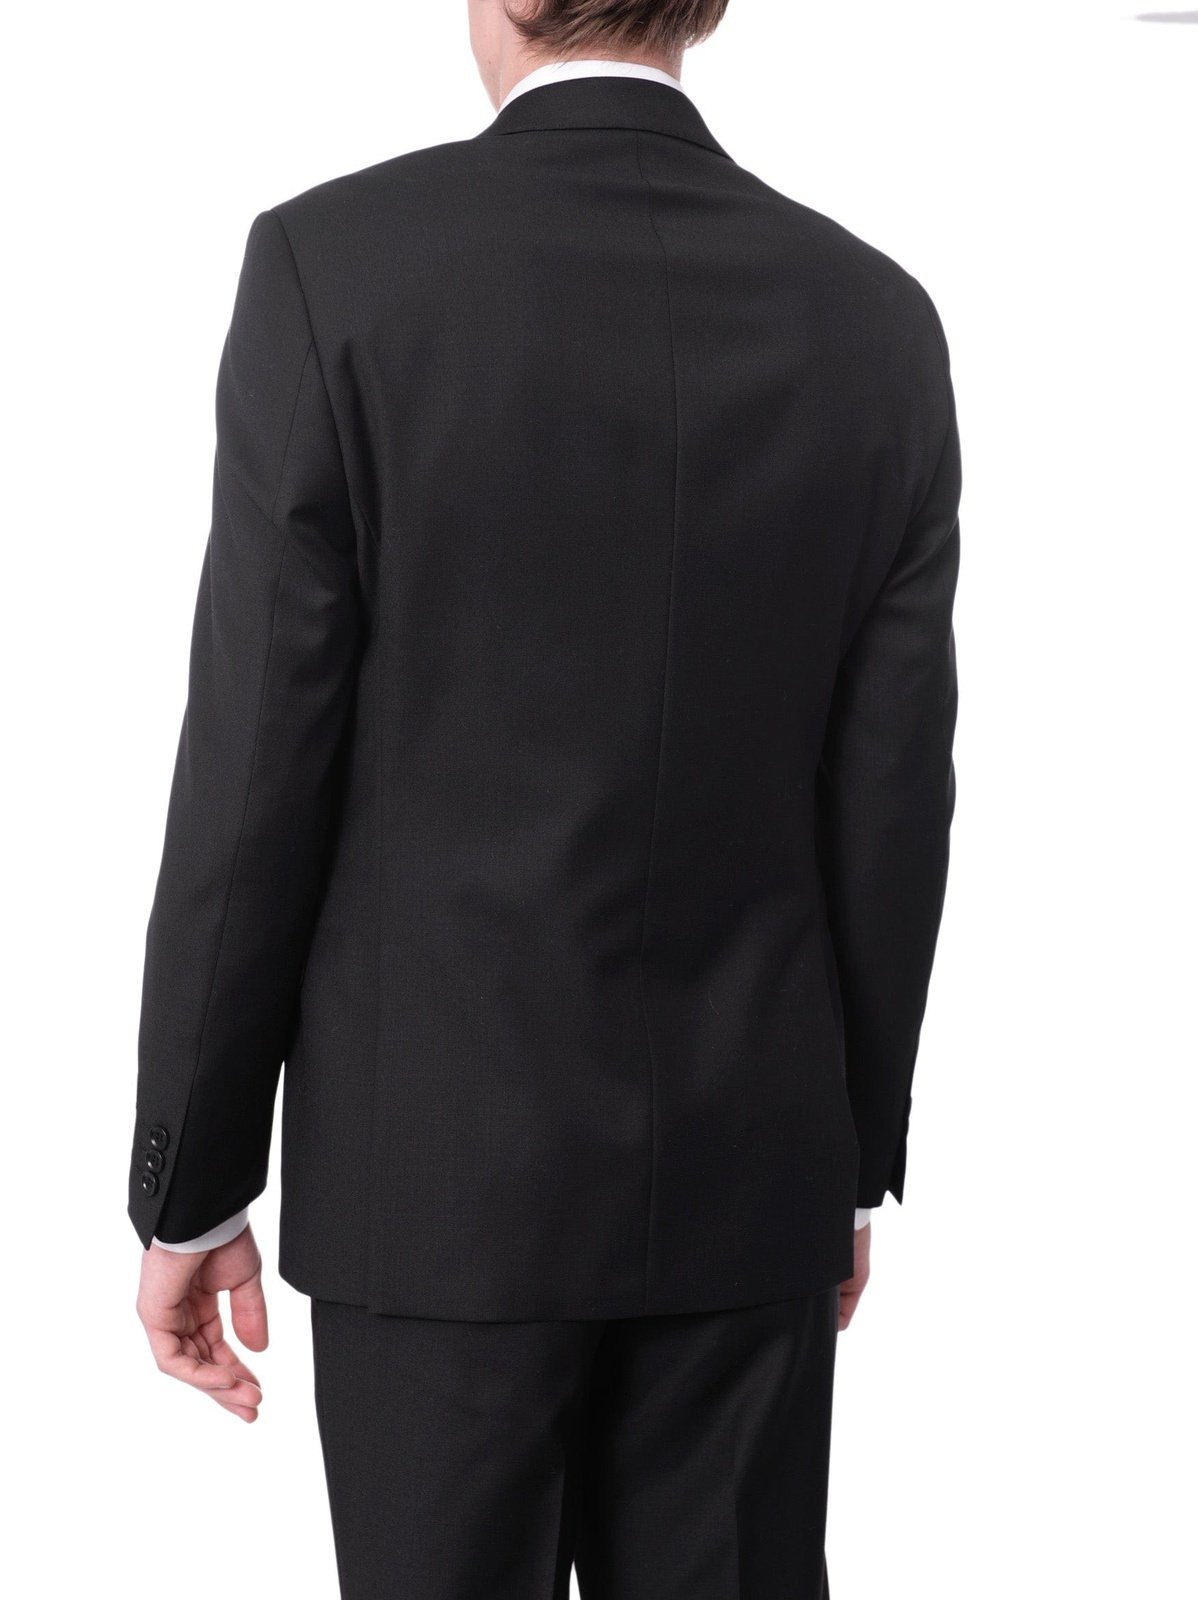 Label M Bestselling Items Men's Euro Slim Fit Solid Black Two Button 2 Piece 100% Wool Suit